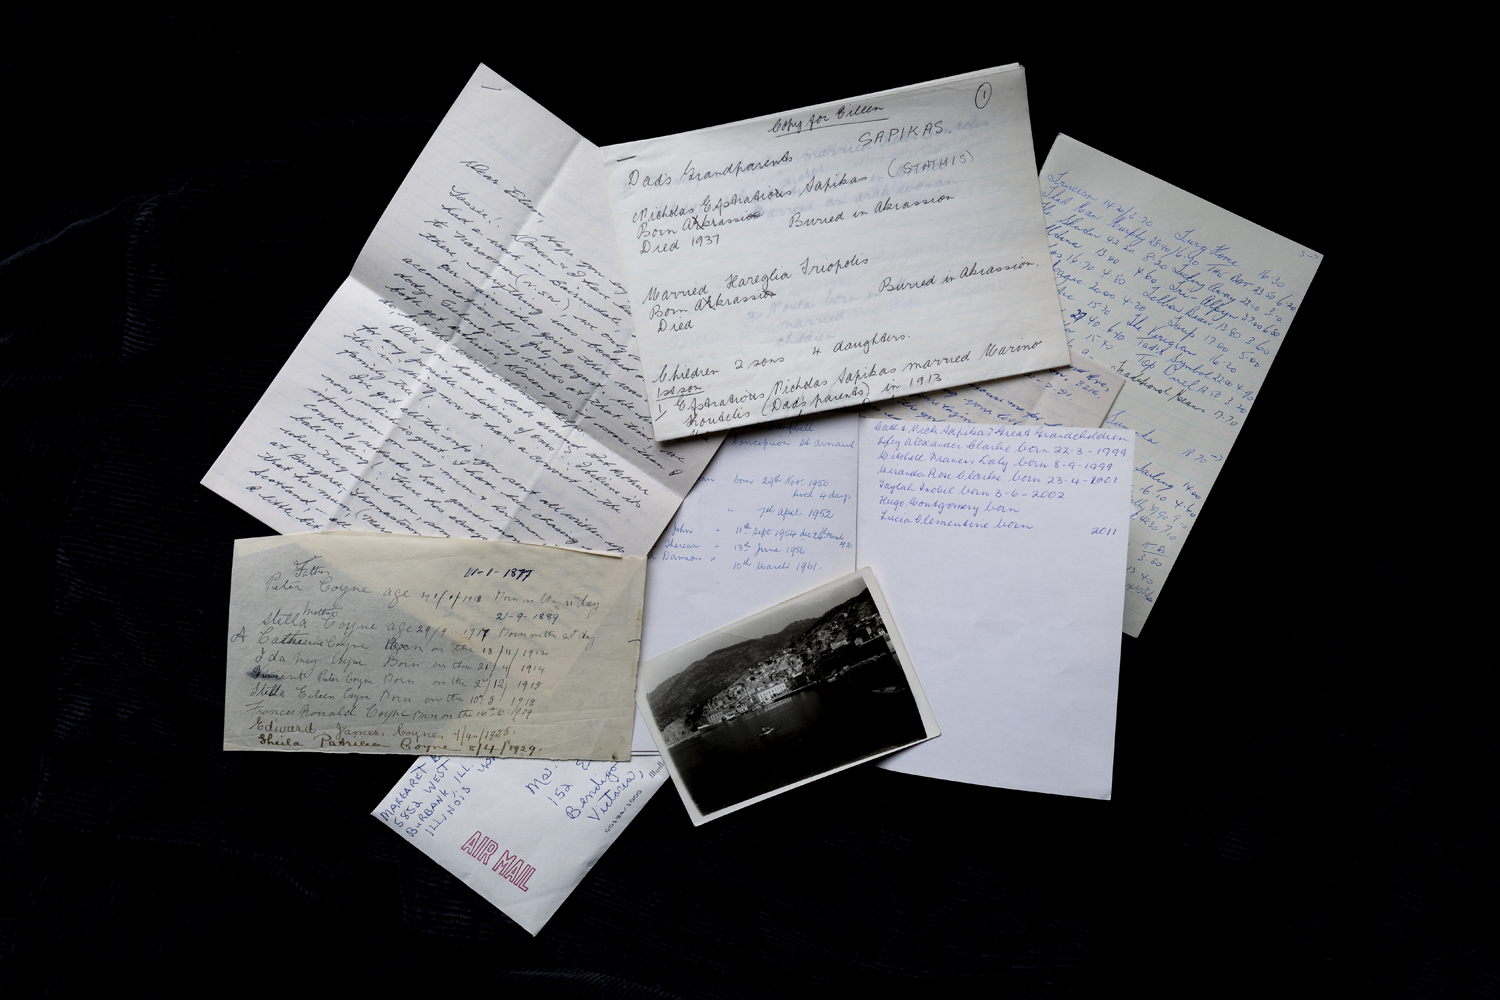 Colour photograph depicting an array of letters and a black and white photograph, scattered on a black surface.